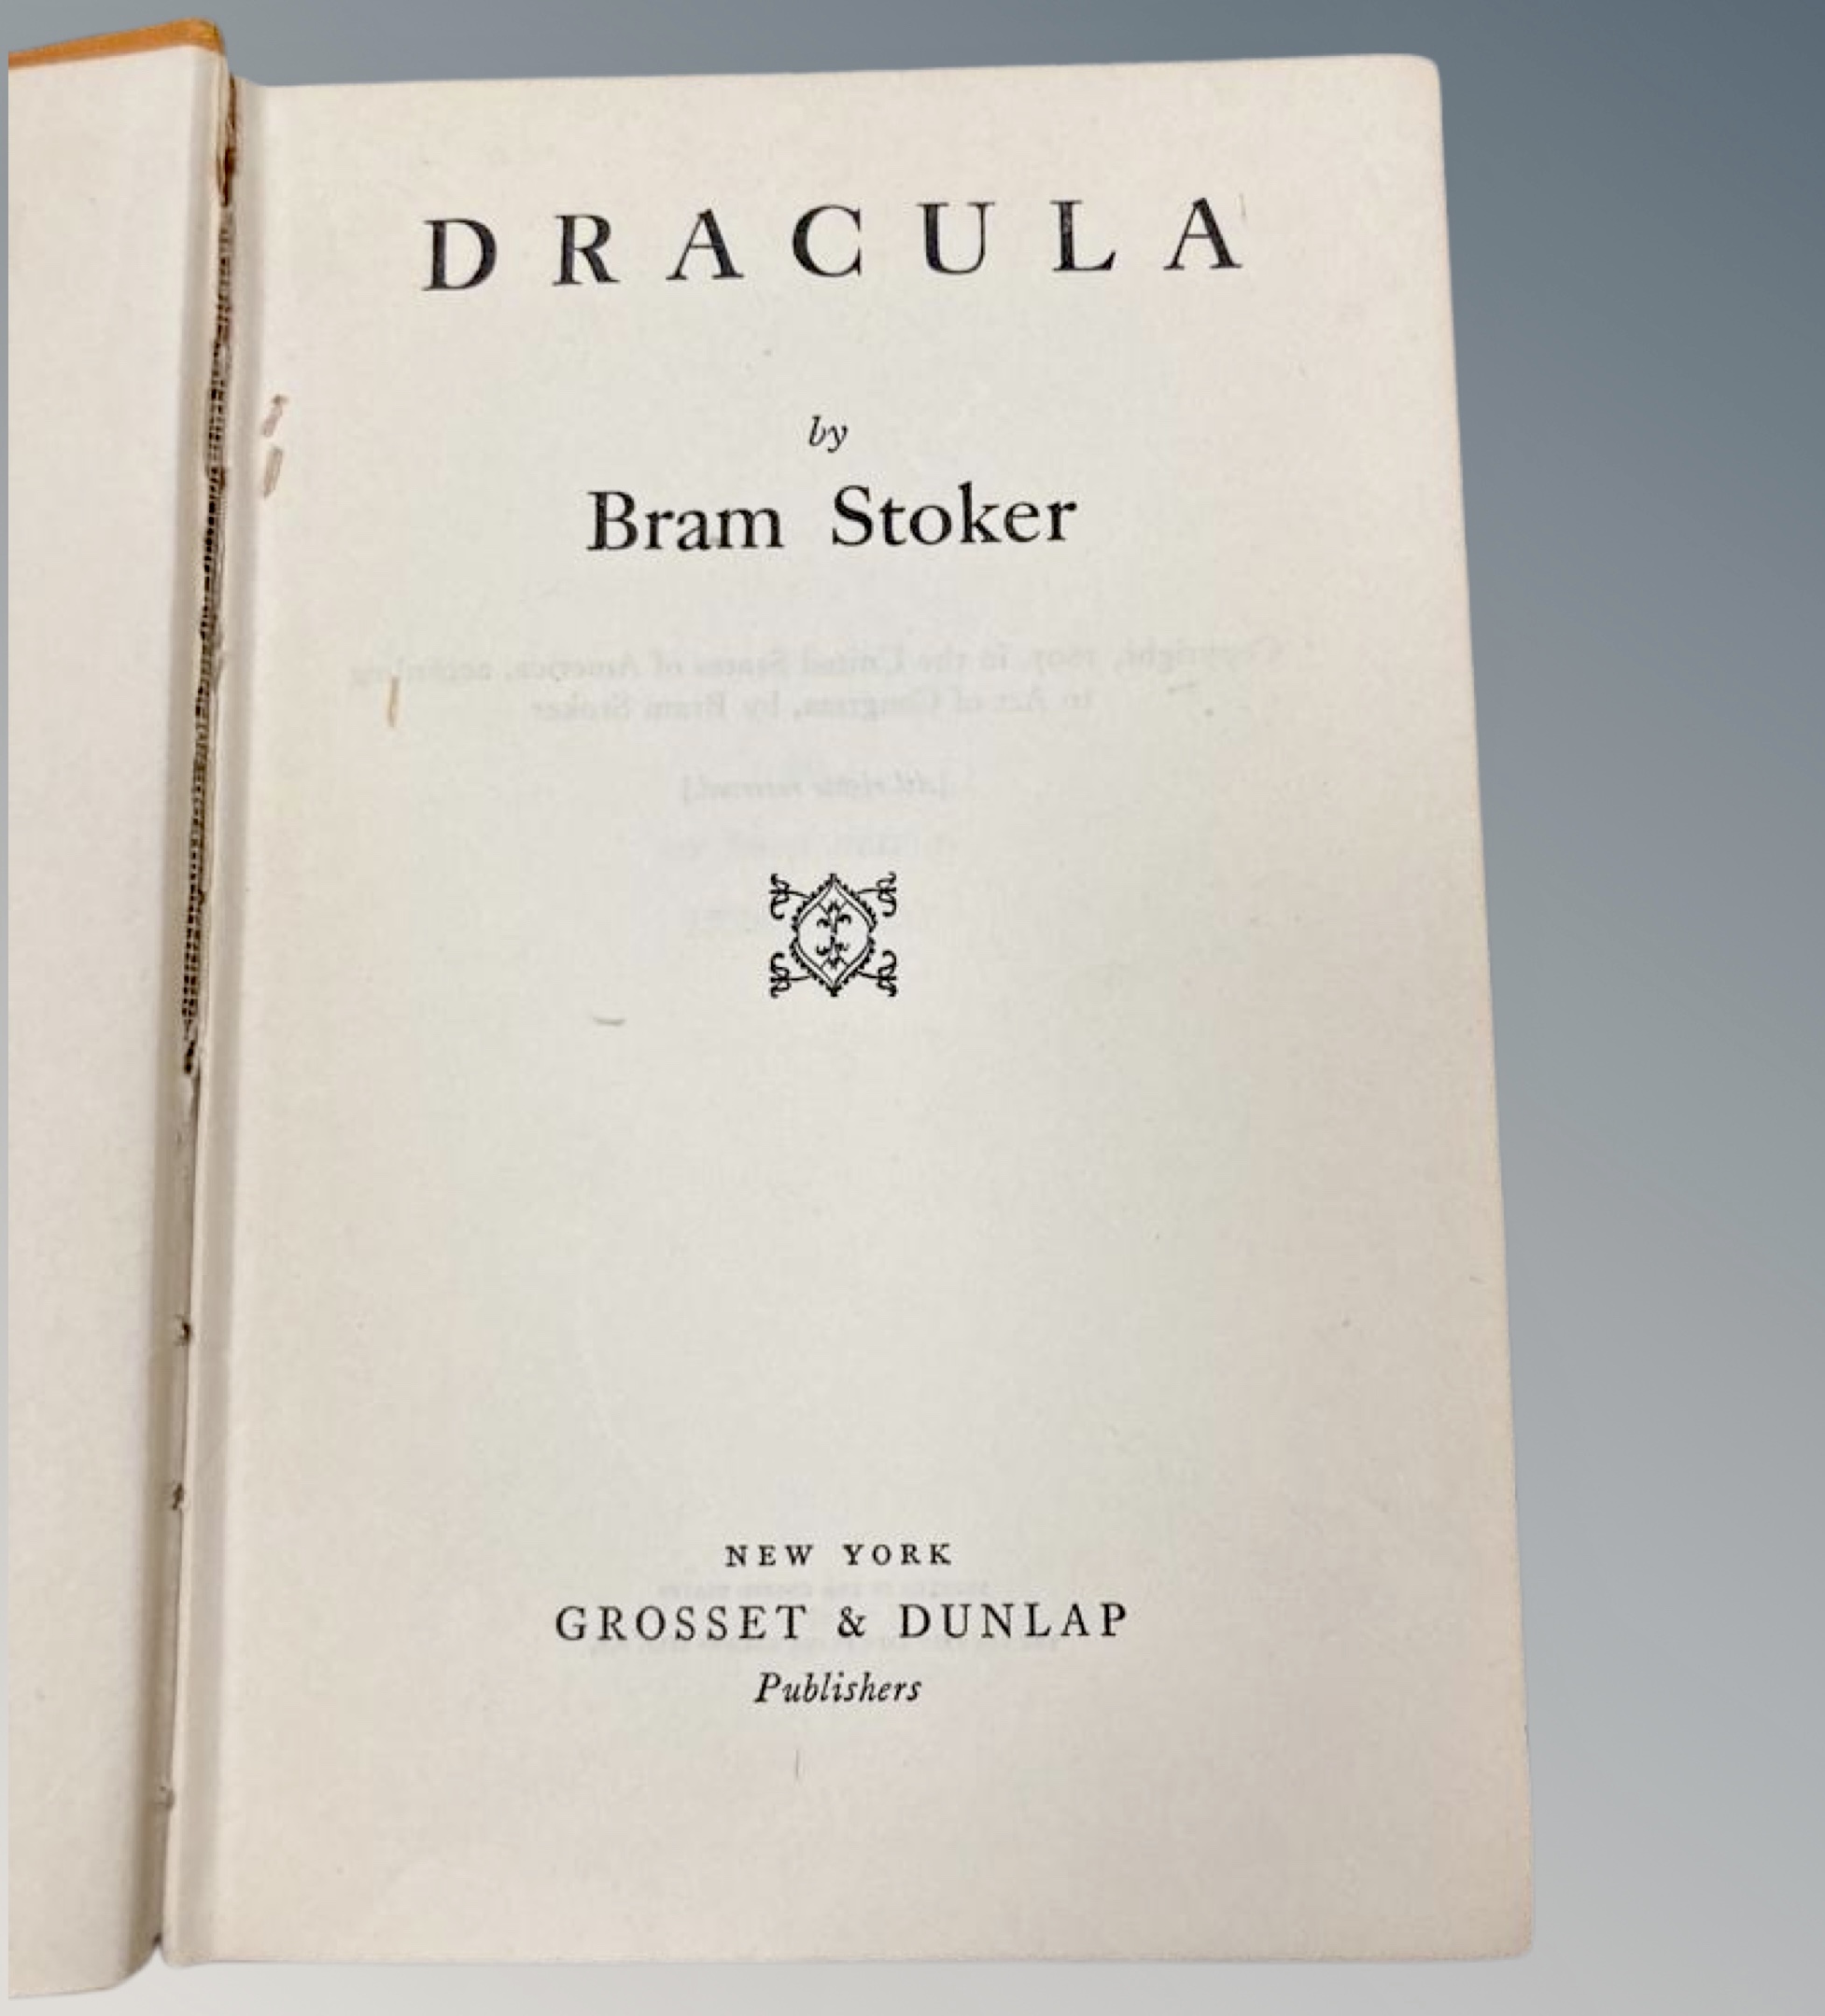 Bram Stoker : Dracula, copyright page states 1897 but this is an American reprint, - Image 2 of 3